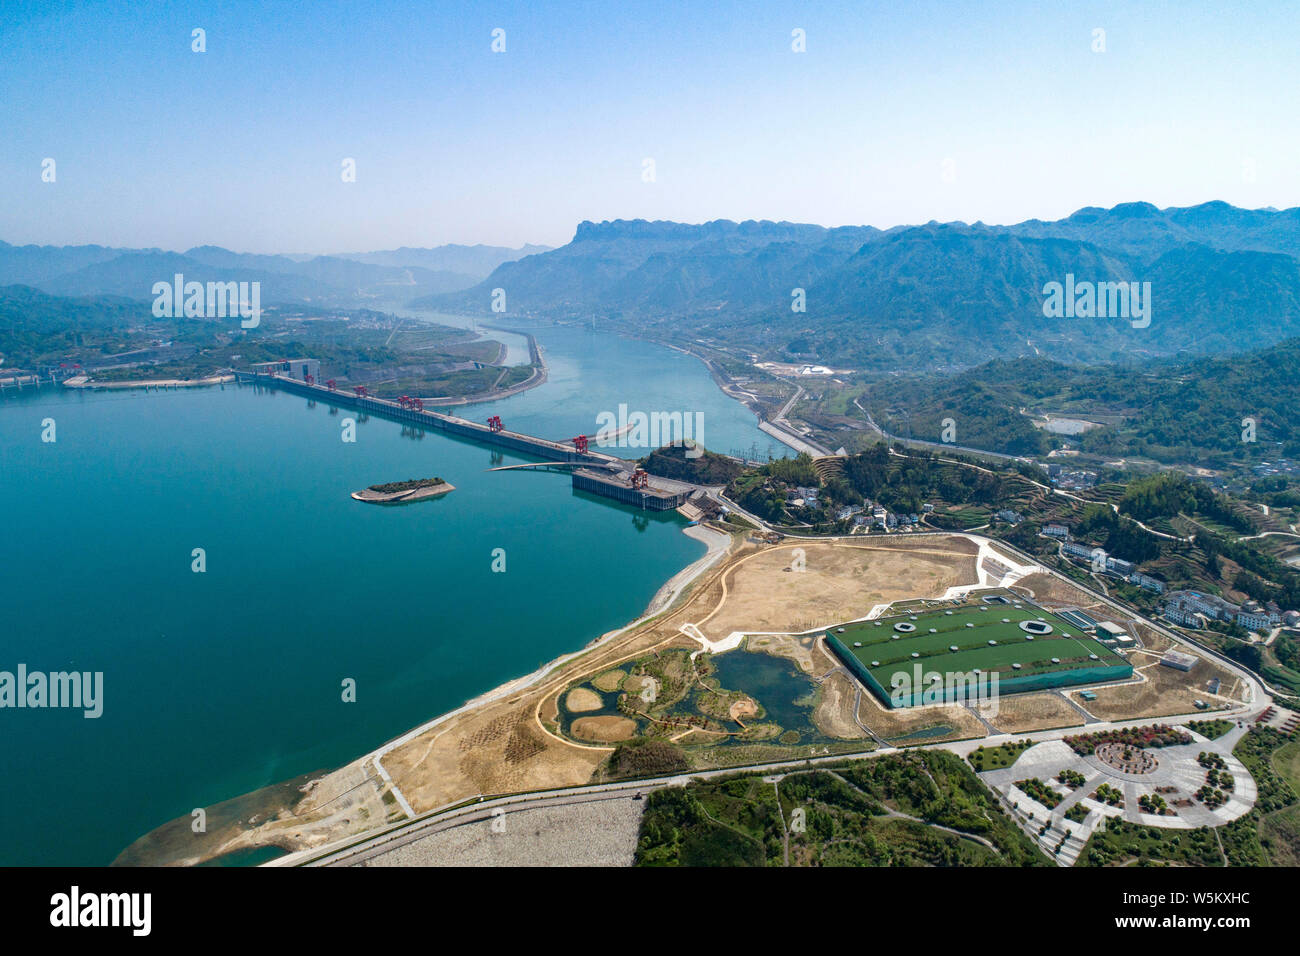 An aerial view of the Three Gorges Dam operated by China Three Gorges Corporation on the Yangtze River in Yichang city, central China's Hubei province Stock Photo